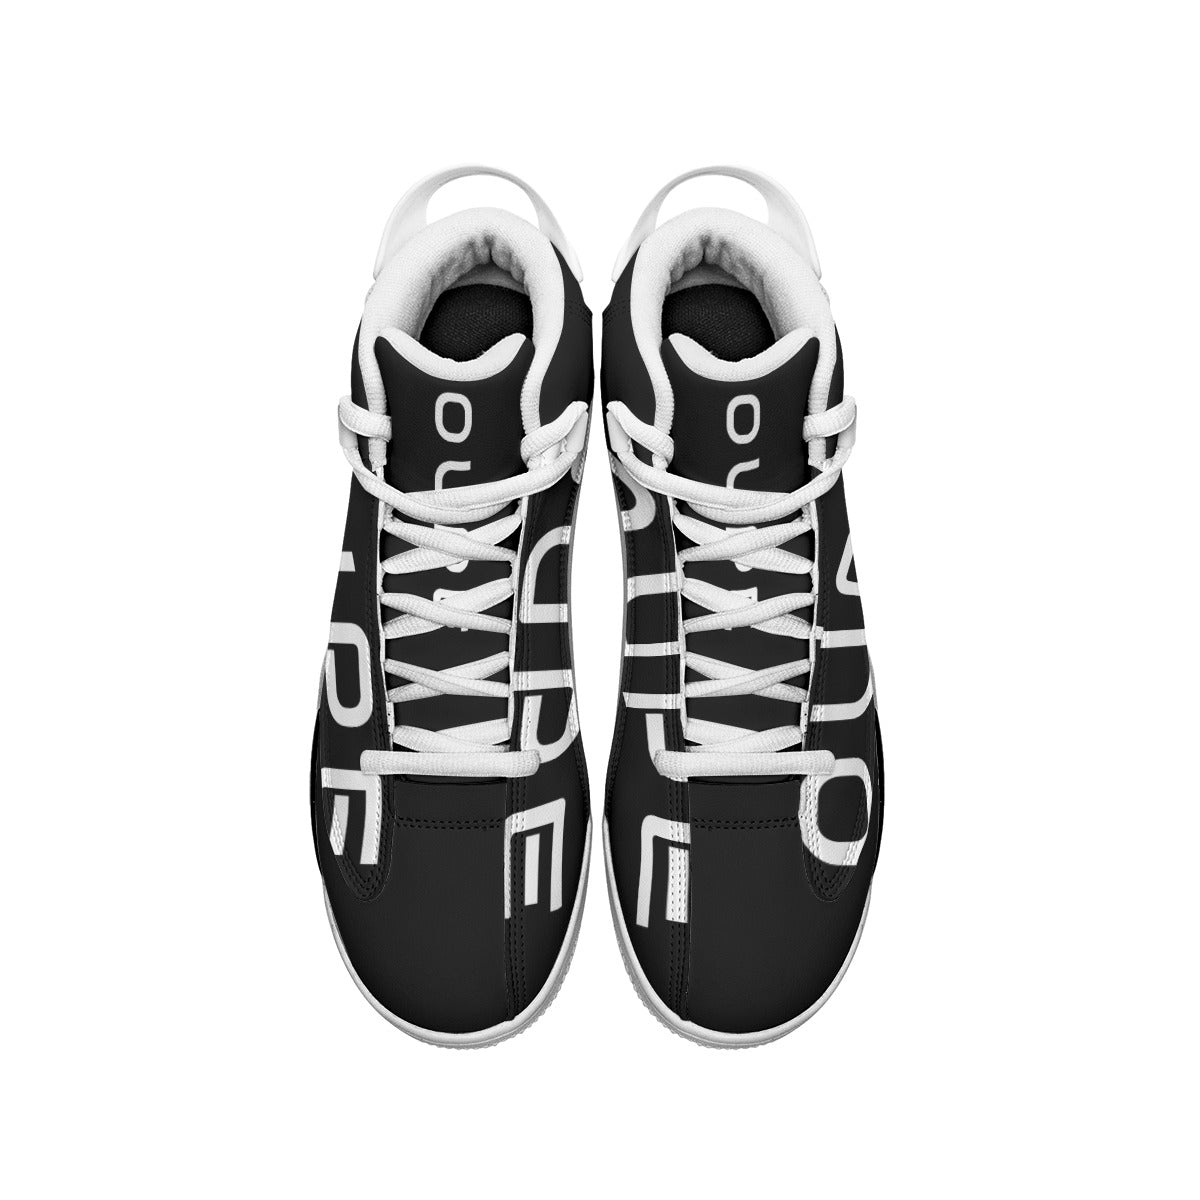 OUPE Men's Shock Absorption and Non-Slip Basketball Shoes